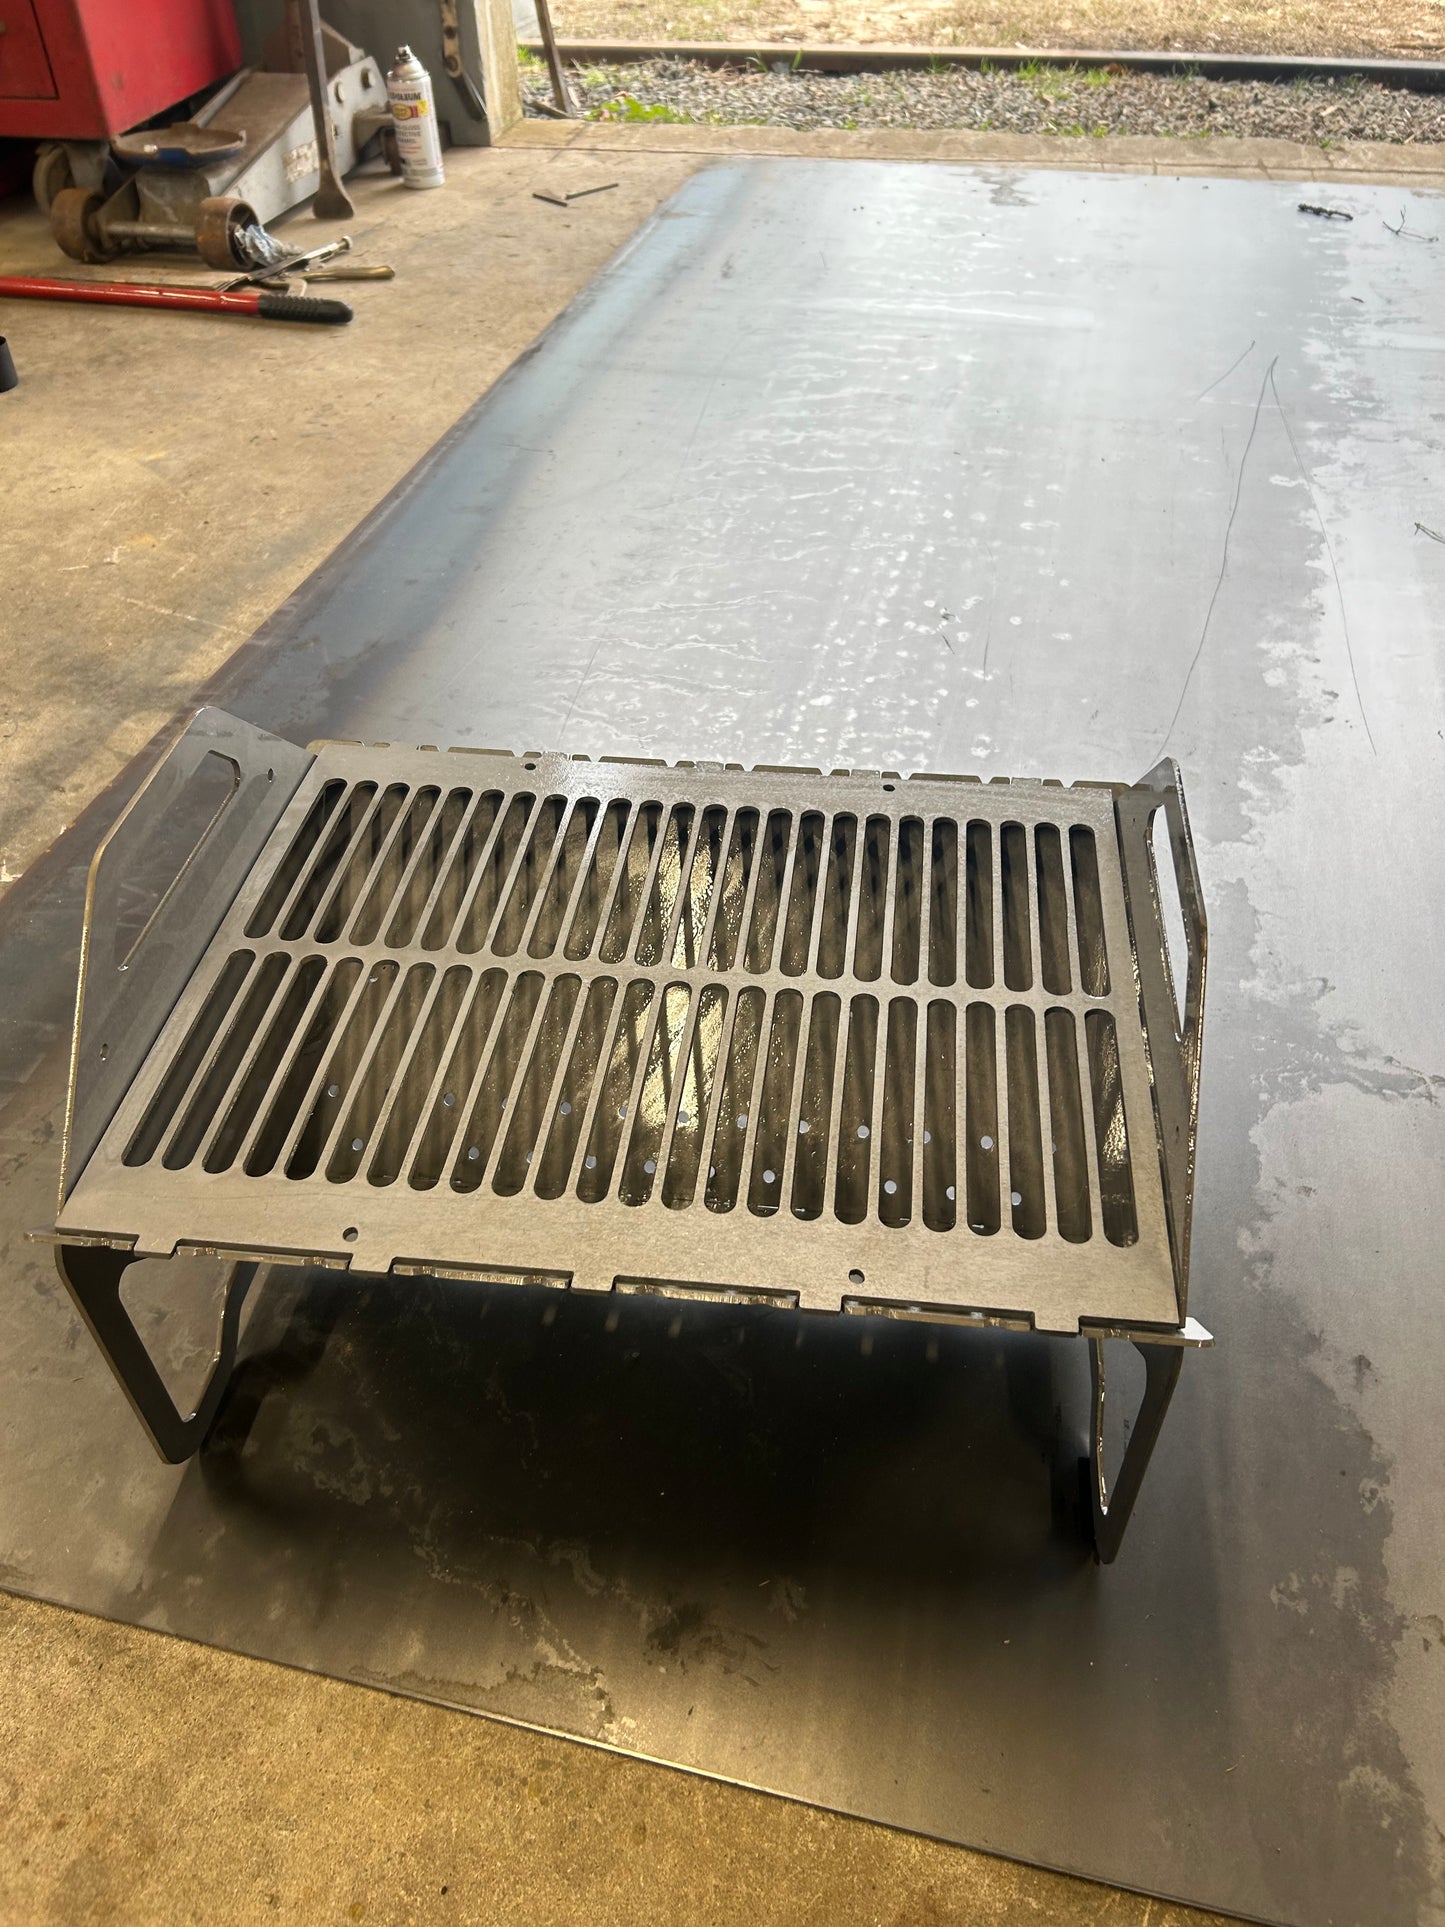 Collapsible grill